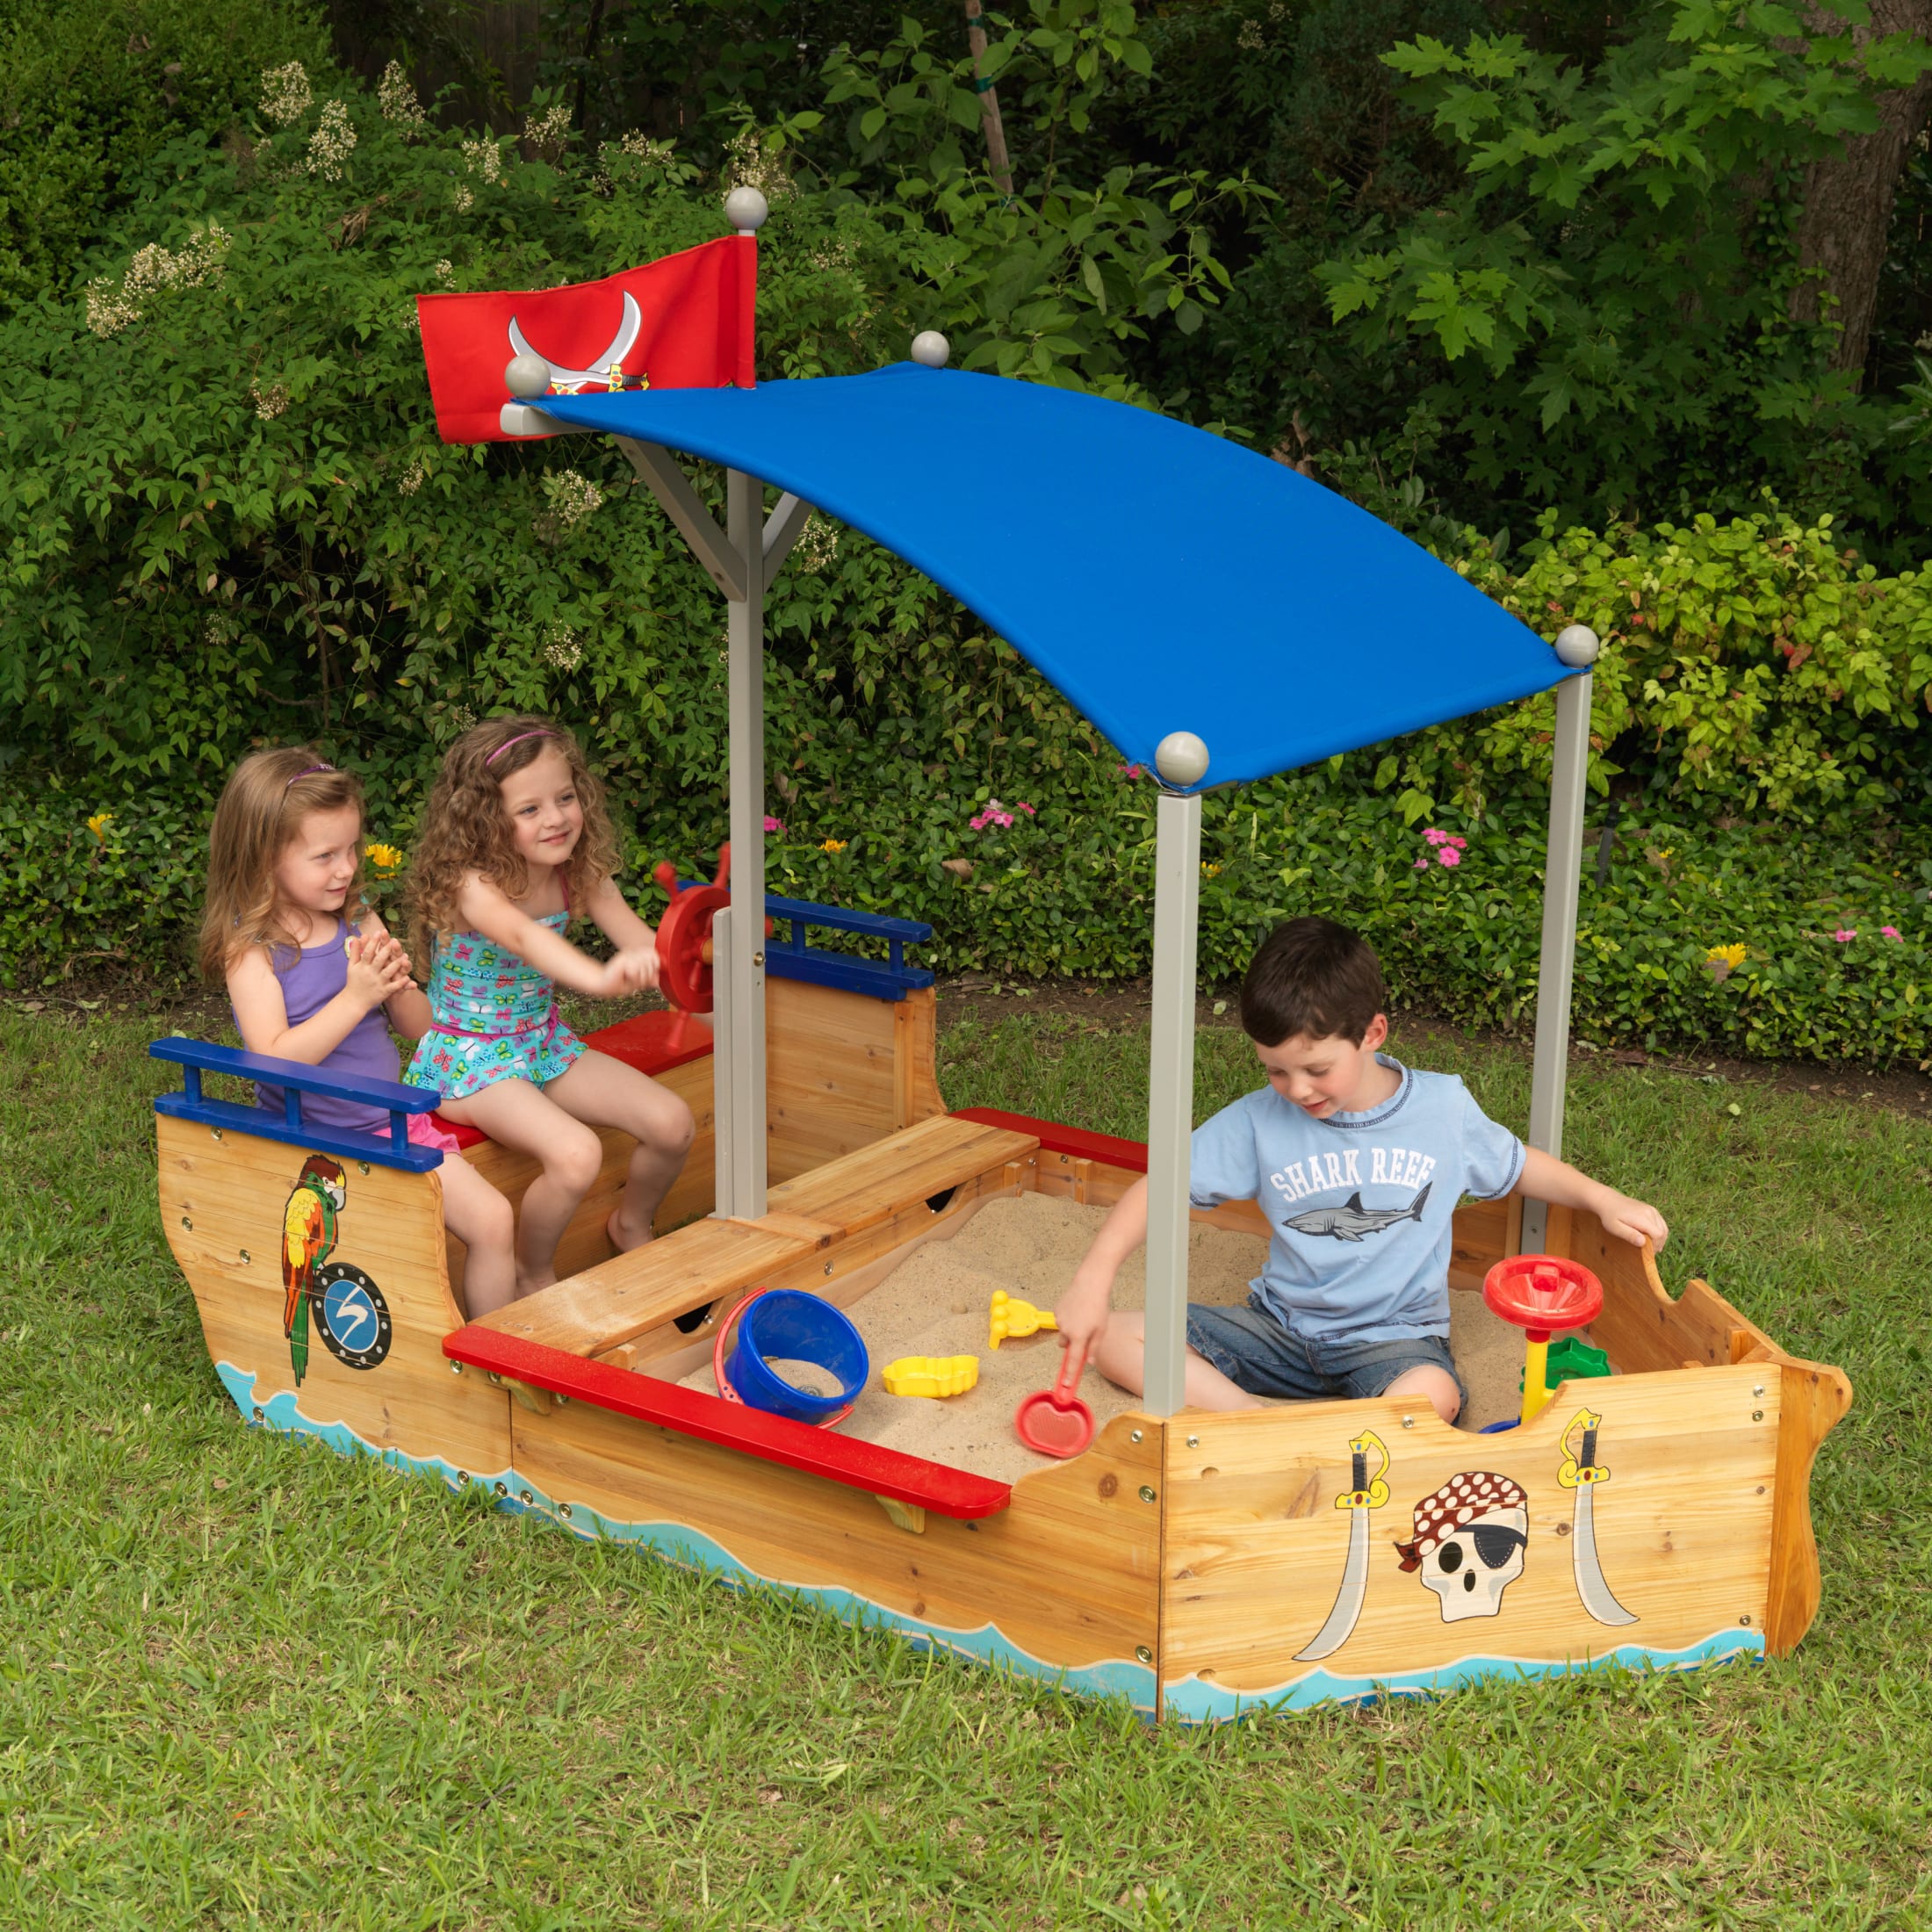 KidKraft Wooden Pirate Sandbox with Canopy, Covered Kid's Sandbox, Blue & Red - image 1 of 5